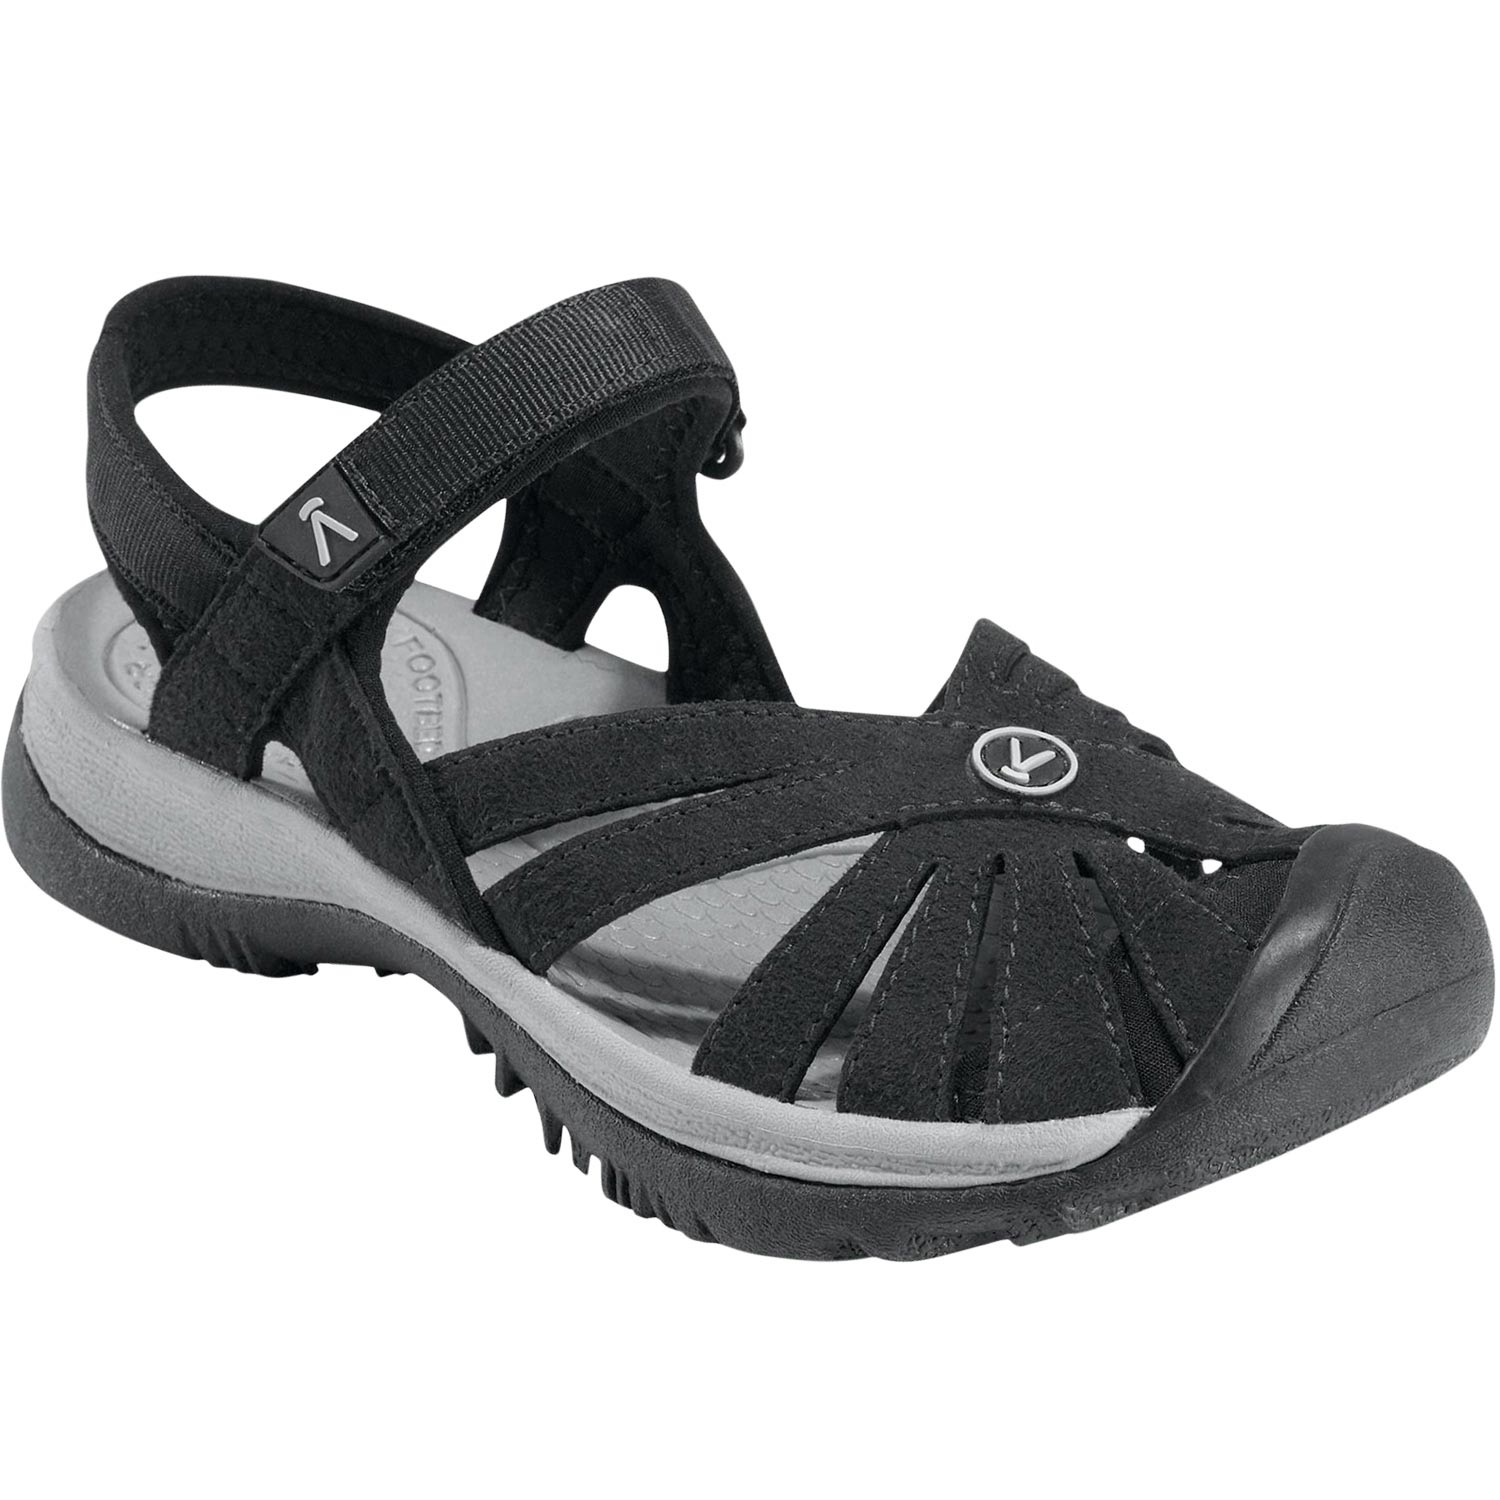 Women's KEEN Rose Sandals | Duluth Trading Company